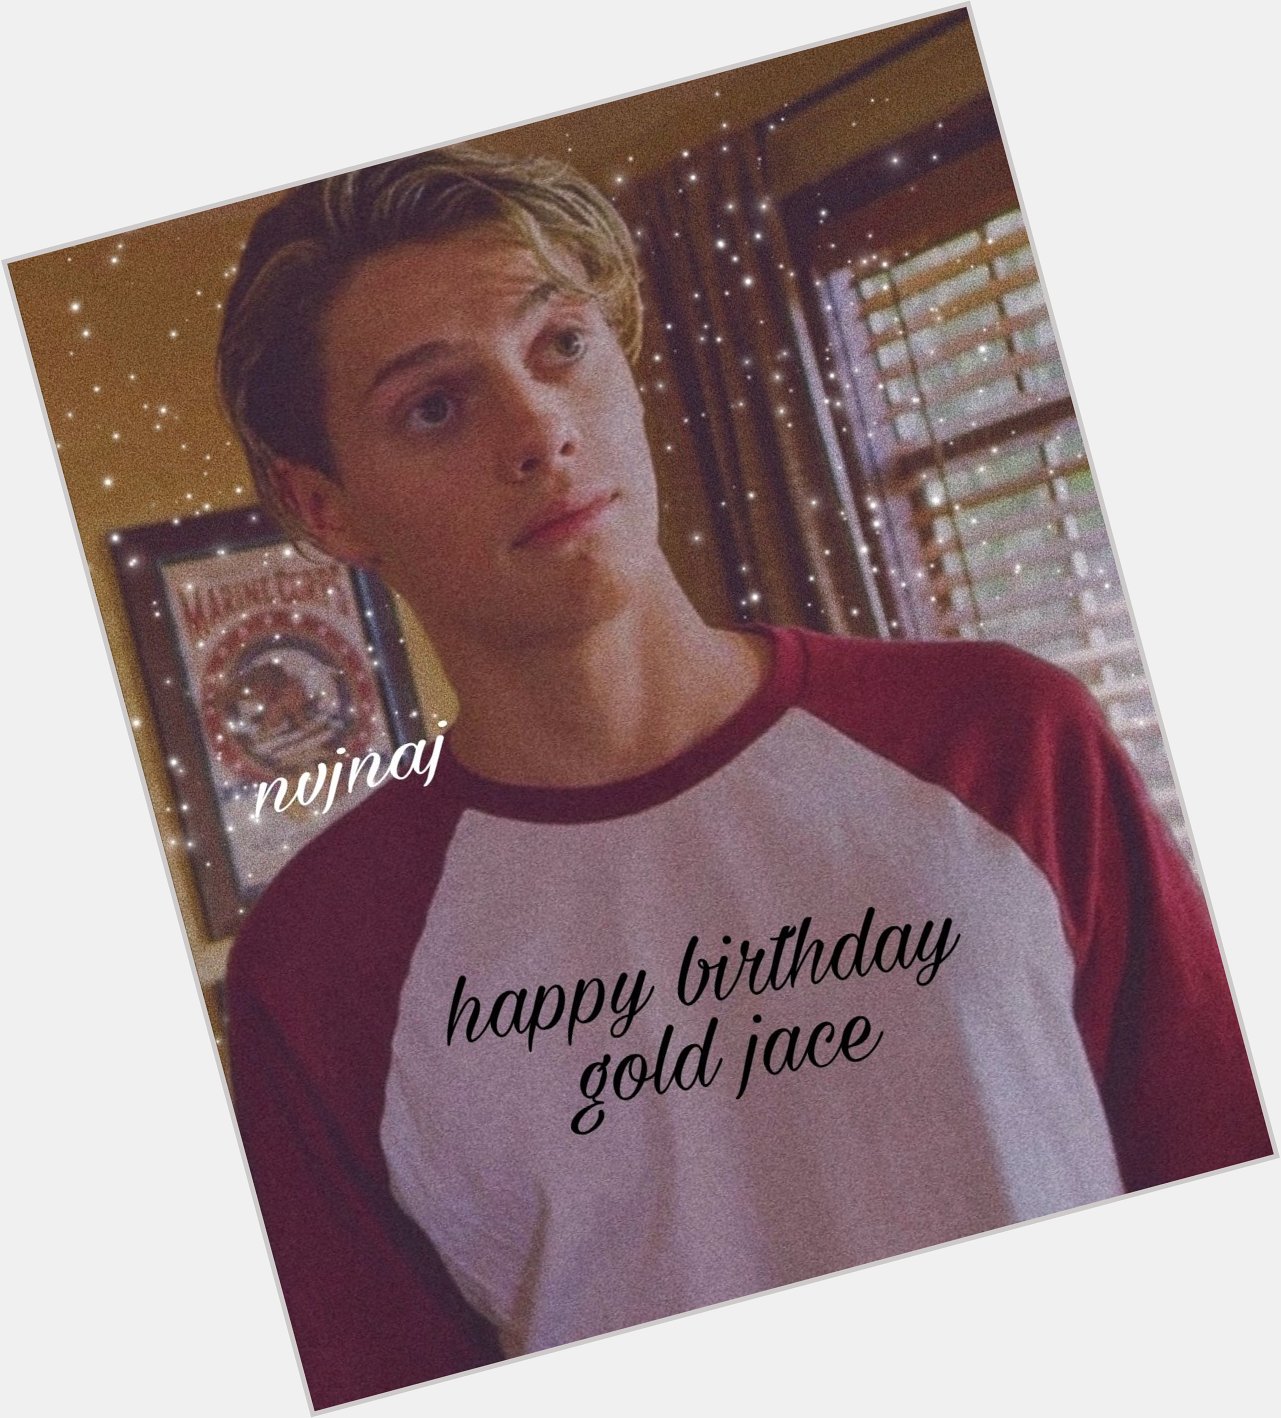 Happy Birthday Jace Norman  I am so happy that you came into my life i love you   